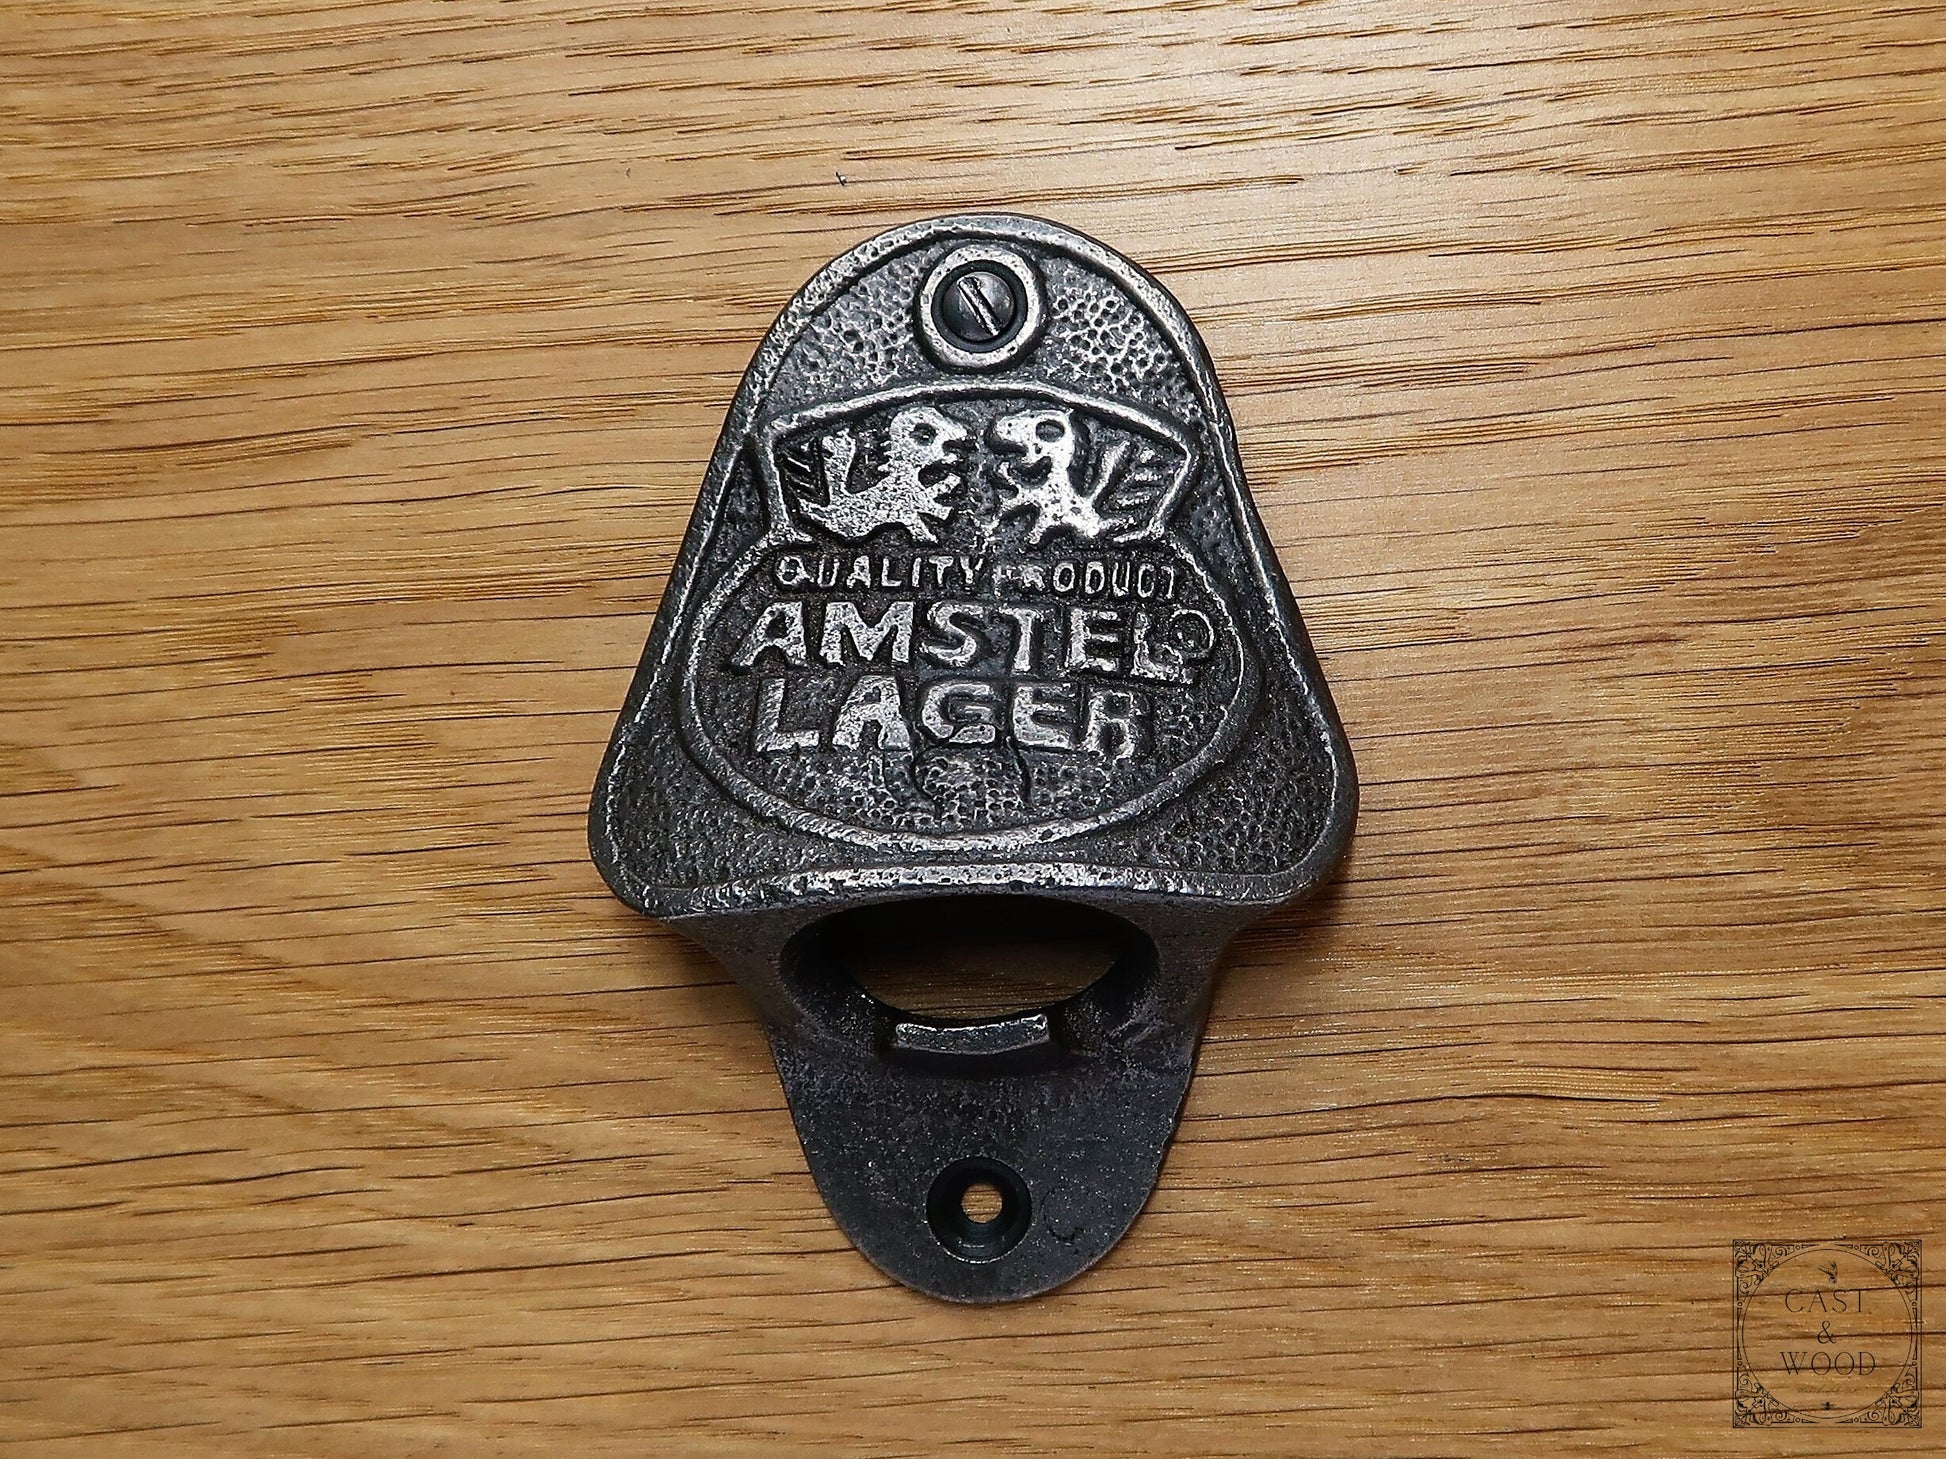 AMSTEL LAGER Cast Iron Wall Mounted Bottle Opener freeshipping - Cast & Wood